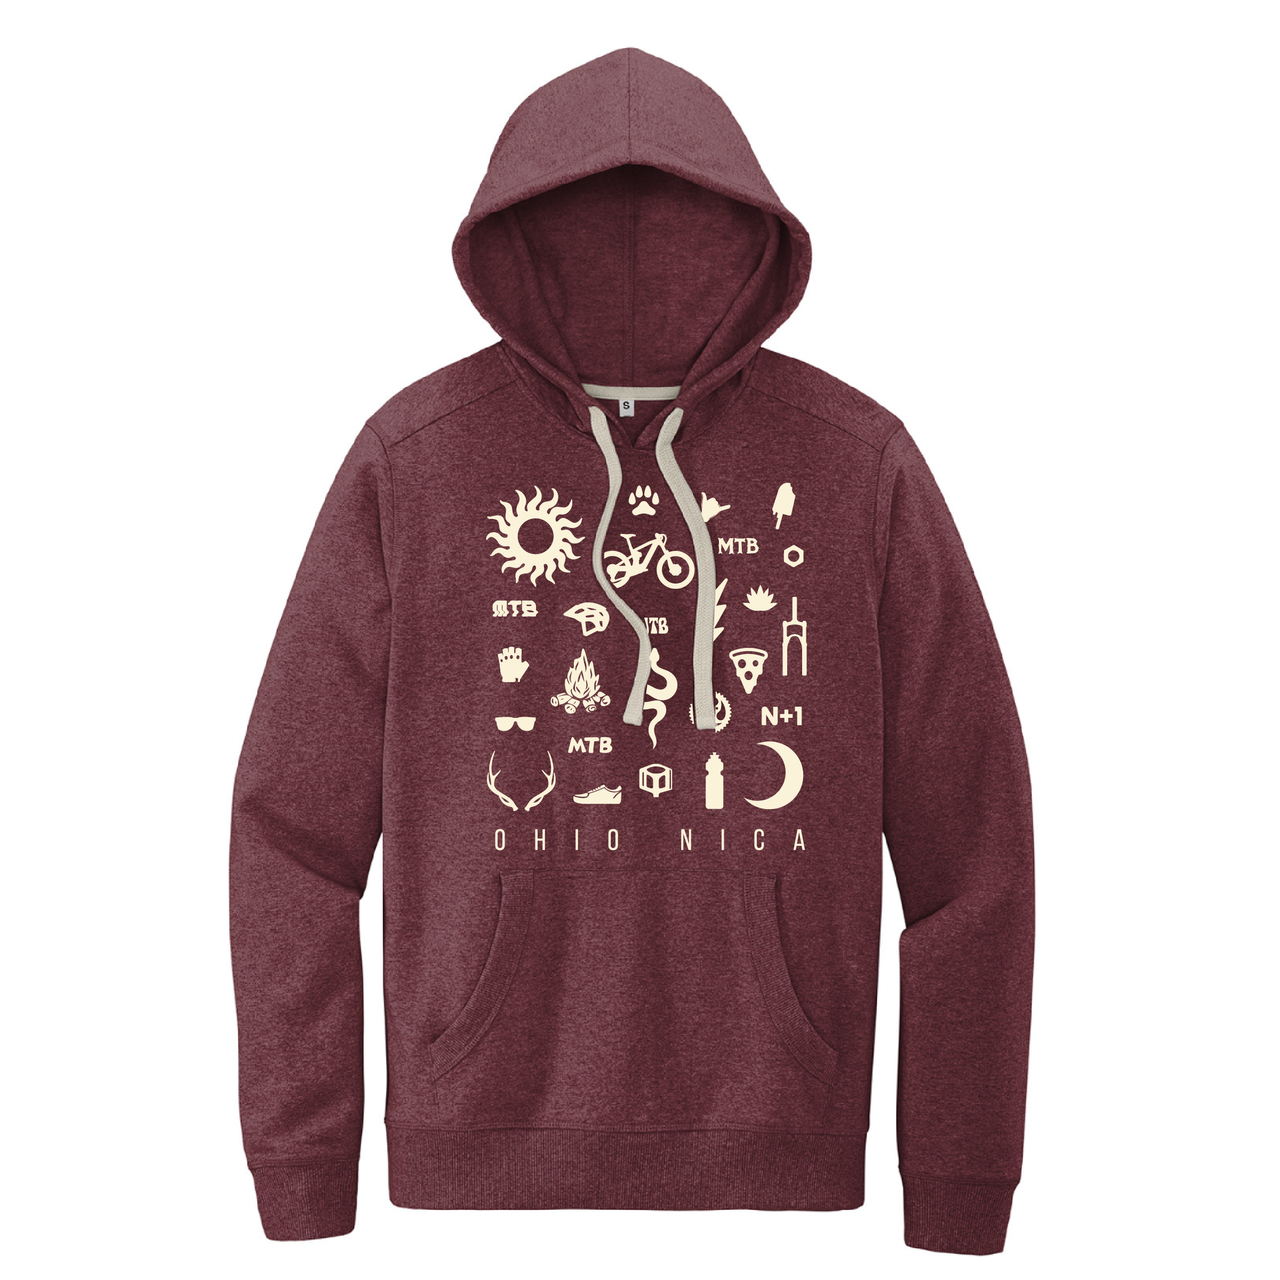 Ohio NICA Bits and Pieces Hoodie